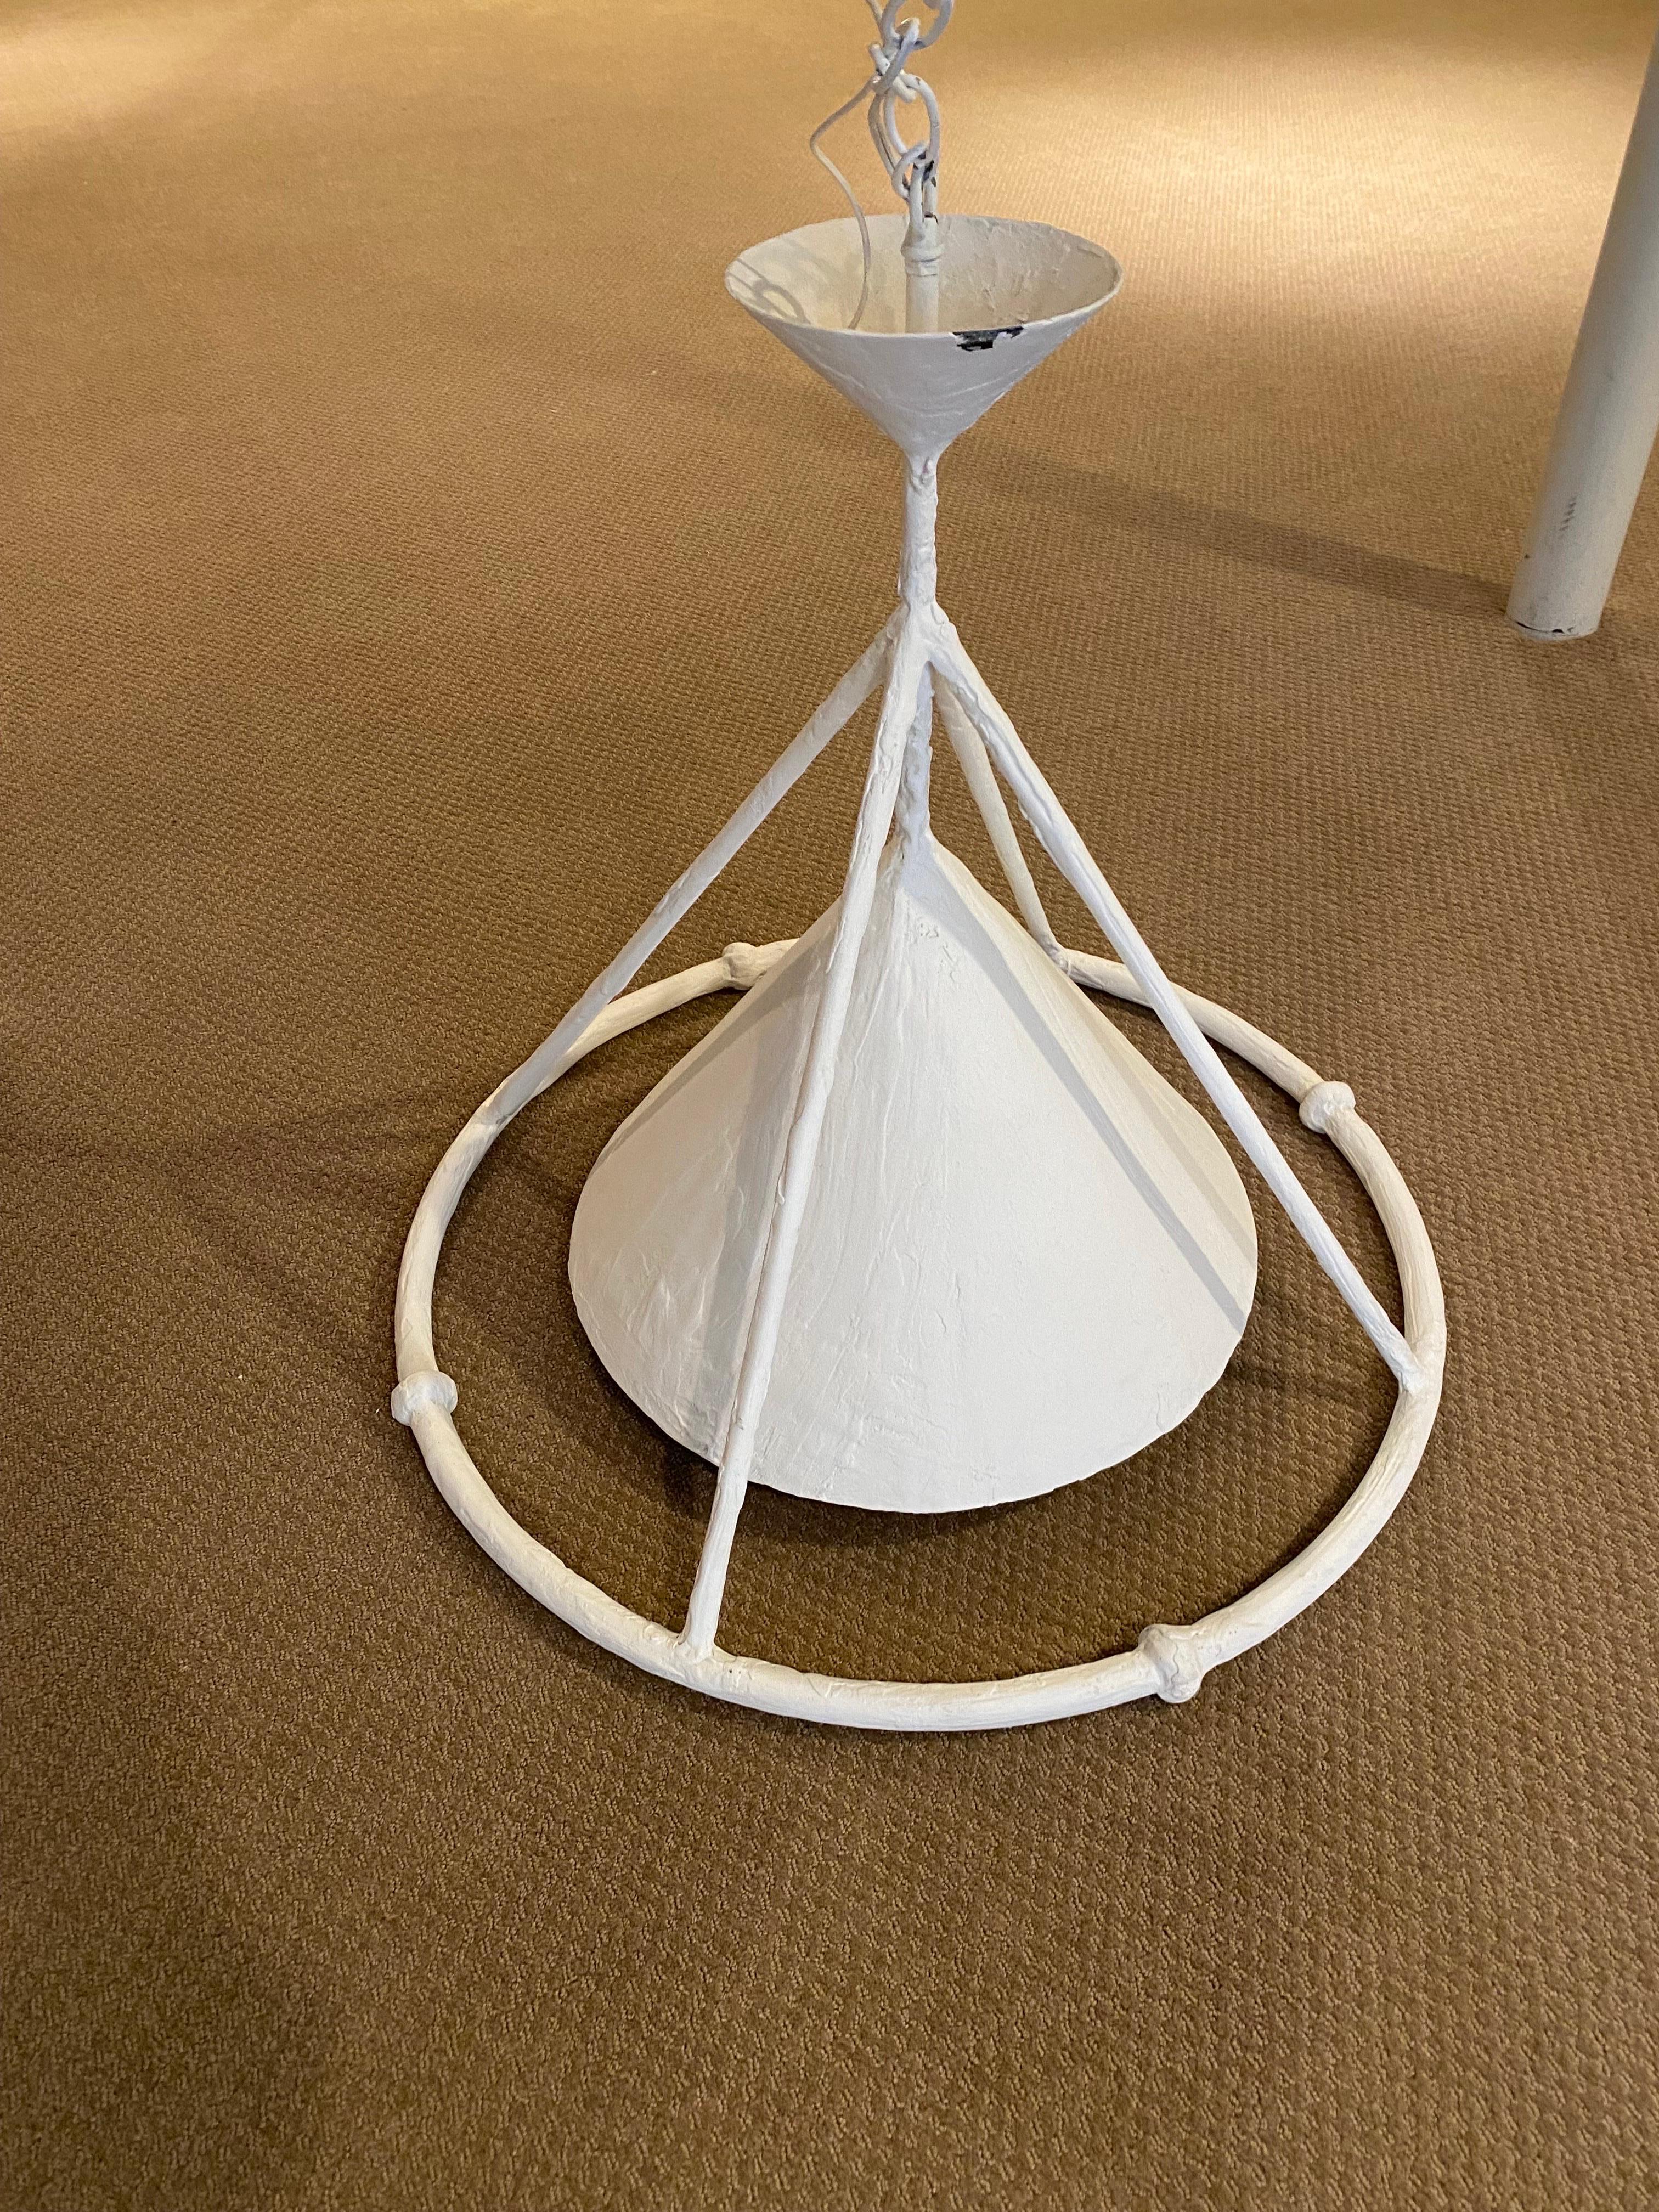 White Plaster Custom Hanging Lighting Fixture by Paul Ferrante 
A outer metal conical structure with four arms rising to an inverse conical top, with loop and white chain. Inside this frame is a solid conical metal shade housing a single edison base